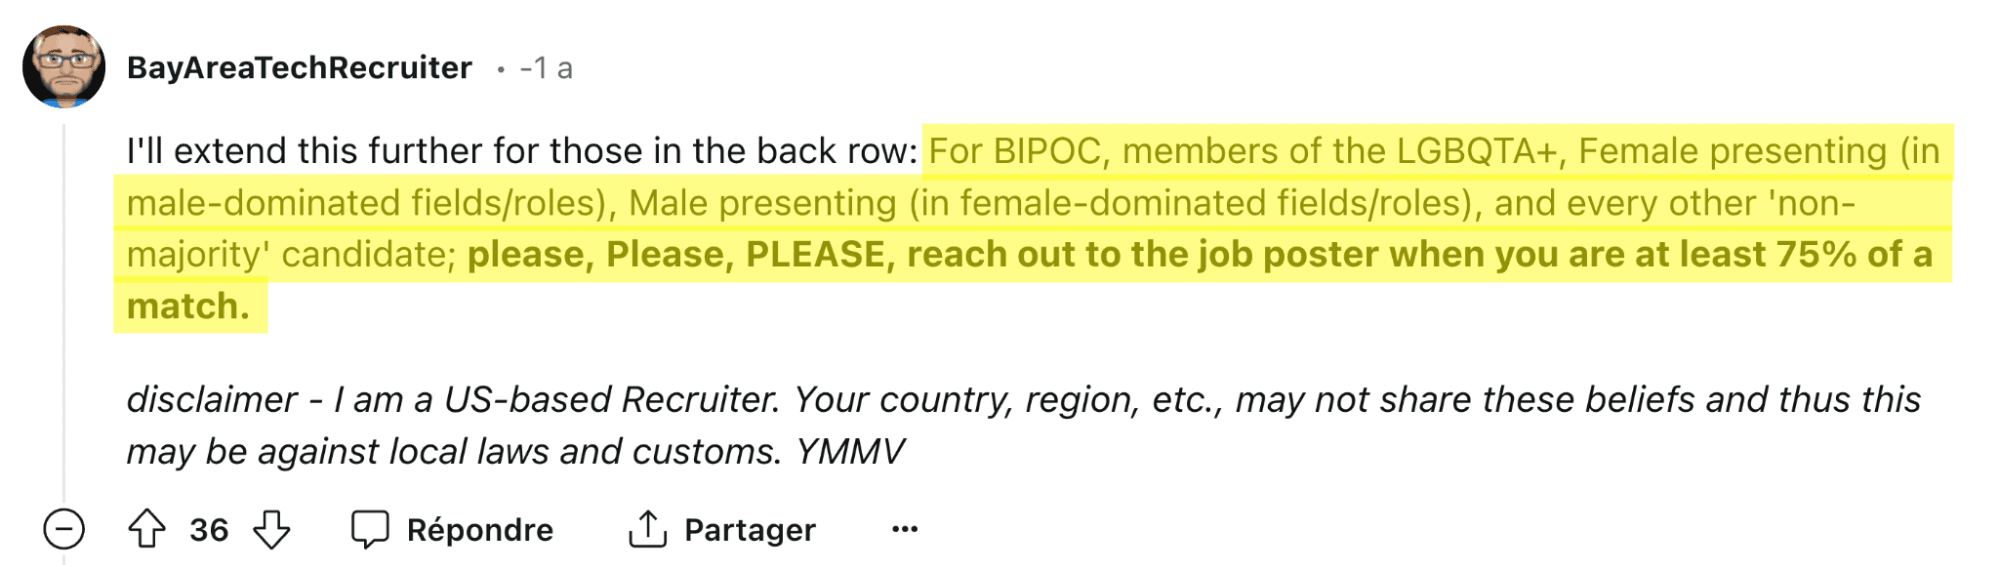 tell recruiters you are from minority recruiter advice reddit - image26.png